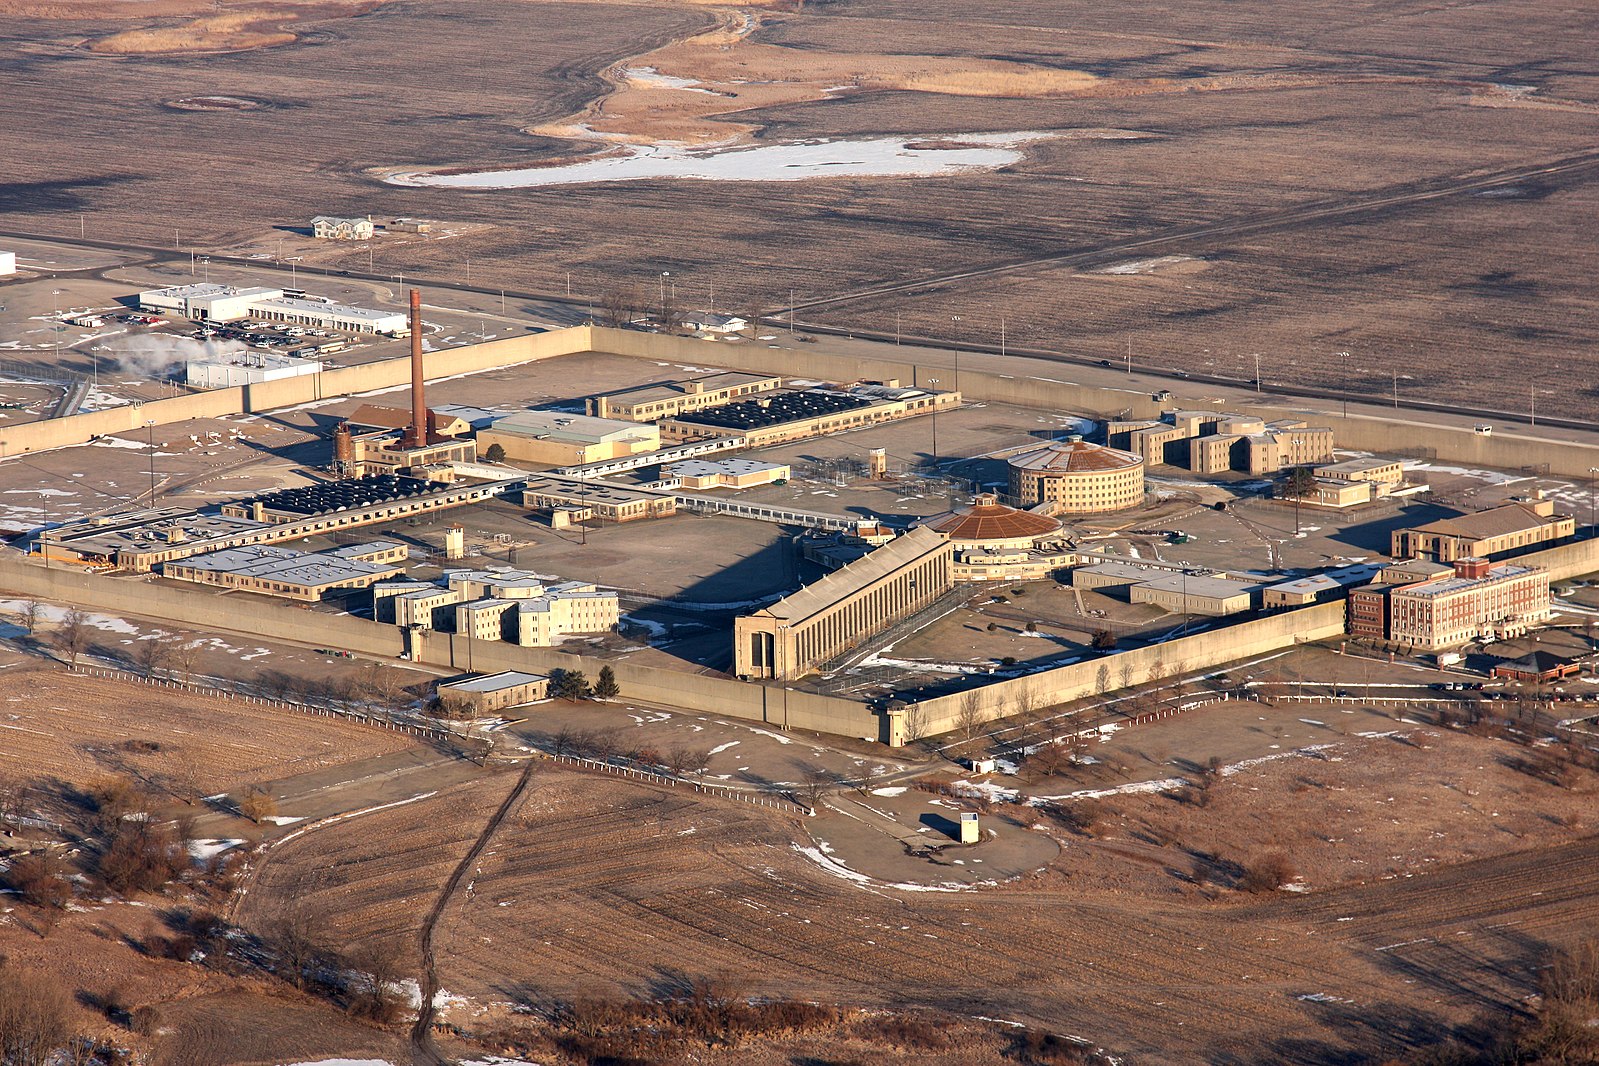  Illinois Advocates Call for Action After Prison Officials Mislead on Contaminated Water 